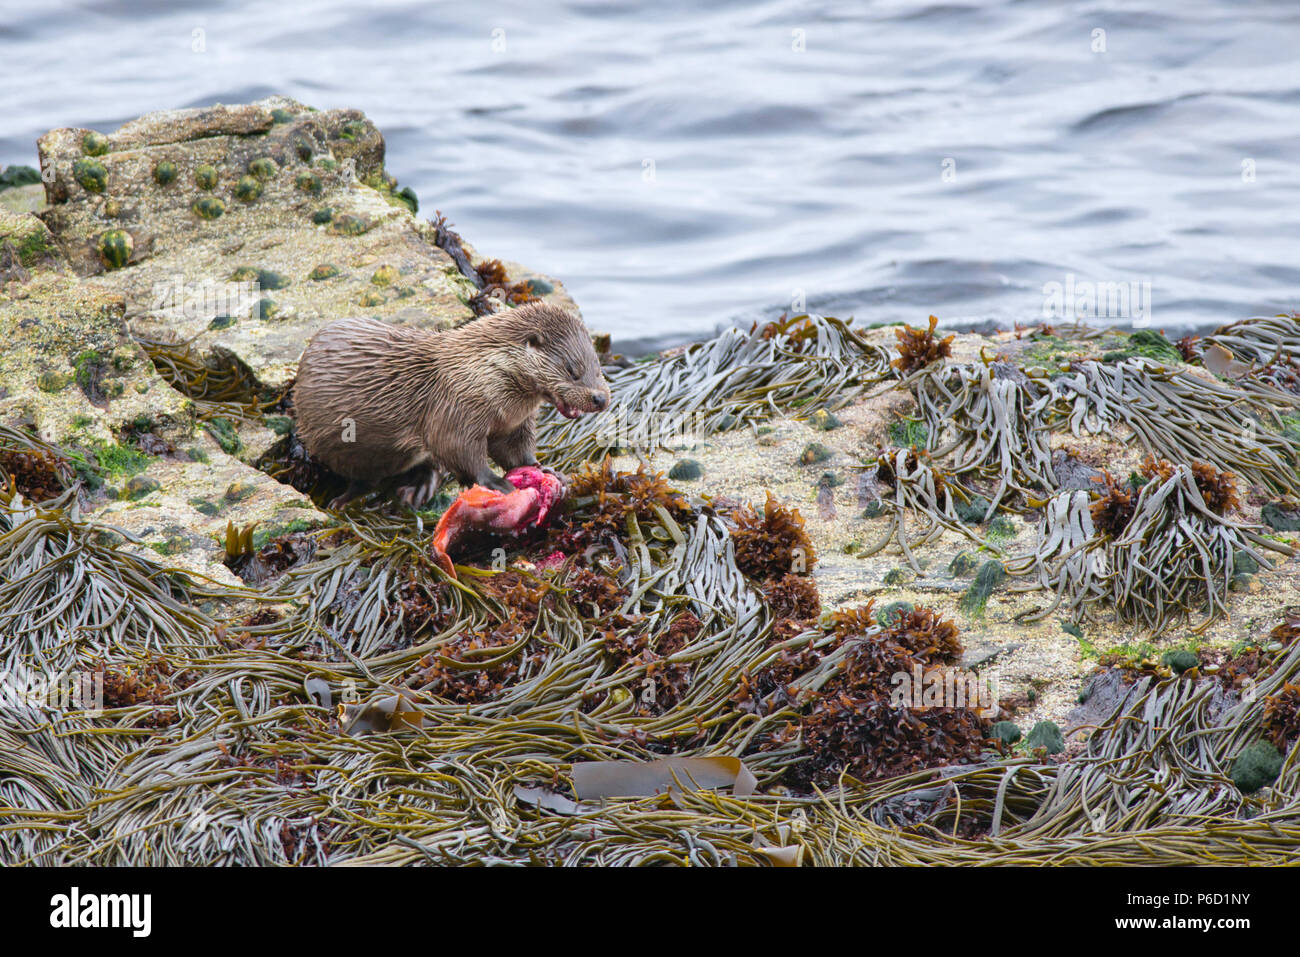 Eurasian or European otter (Lutra lutra) on the coast of Yell, Shetland eating a lumpsucker fish (Cyclopterus lumpus) caught in a nearby kelp bed. Stock Photo